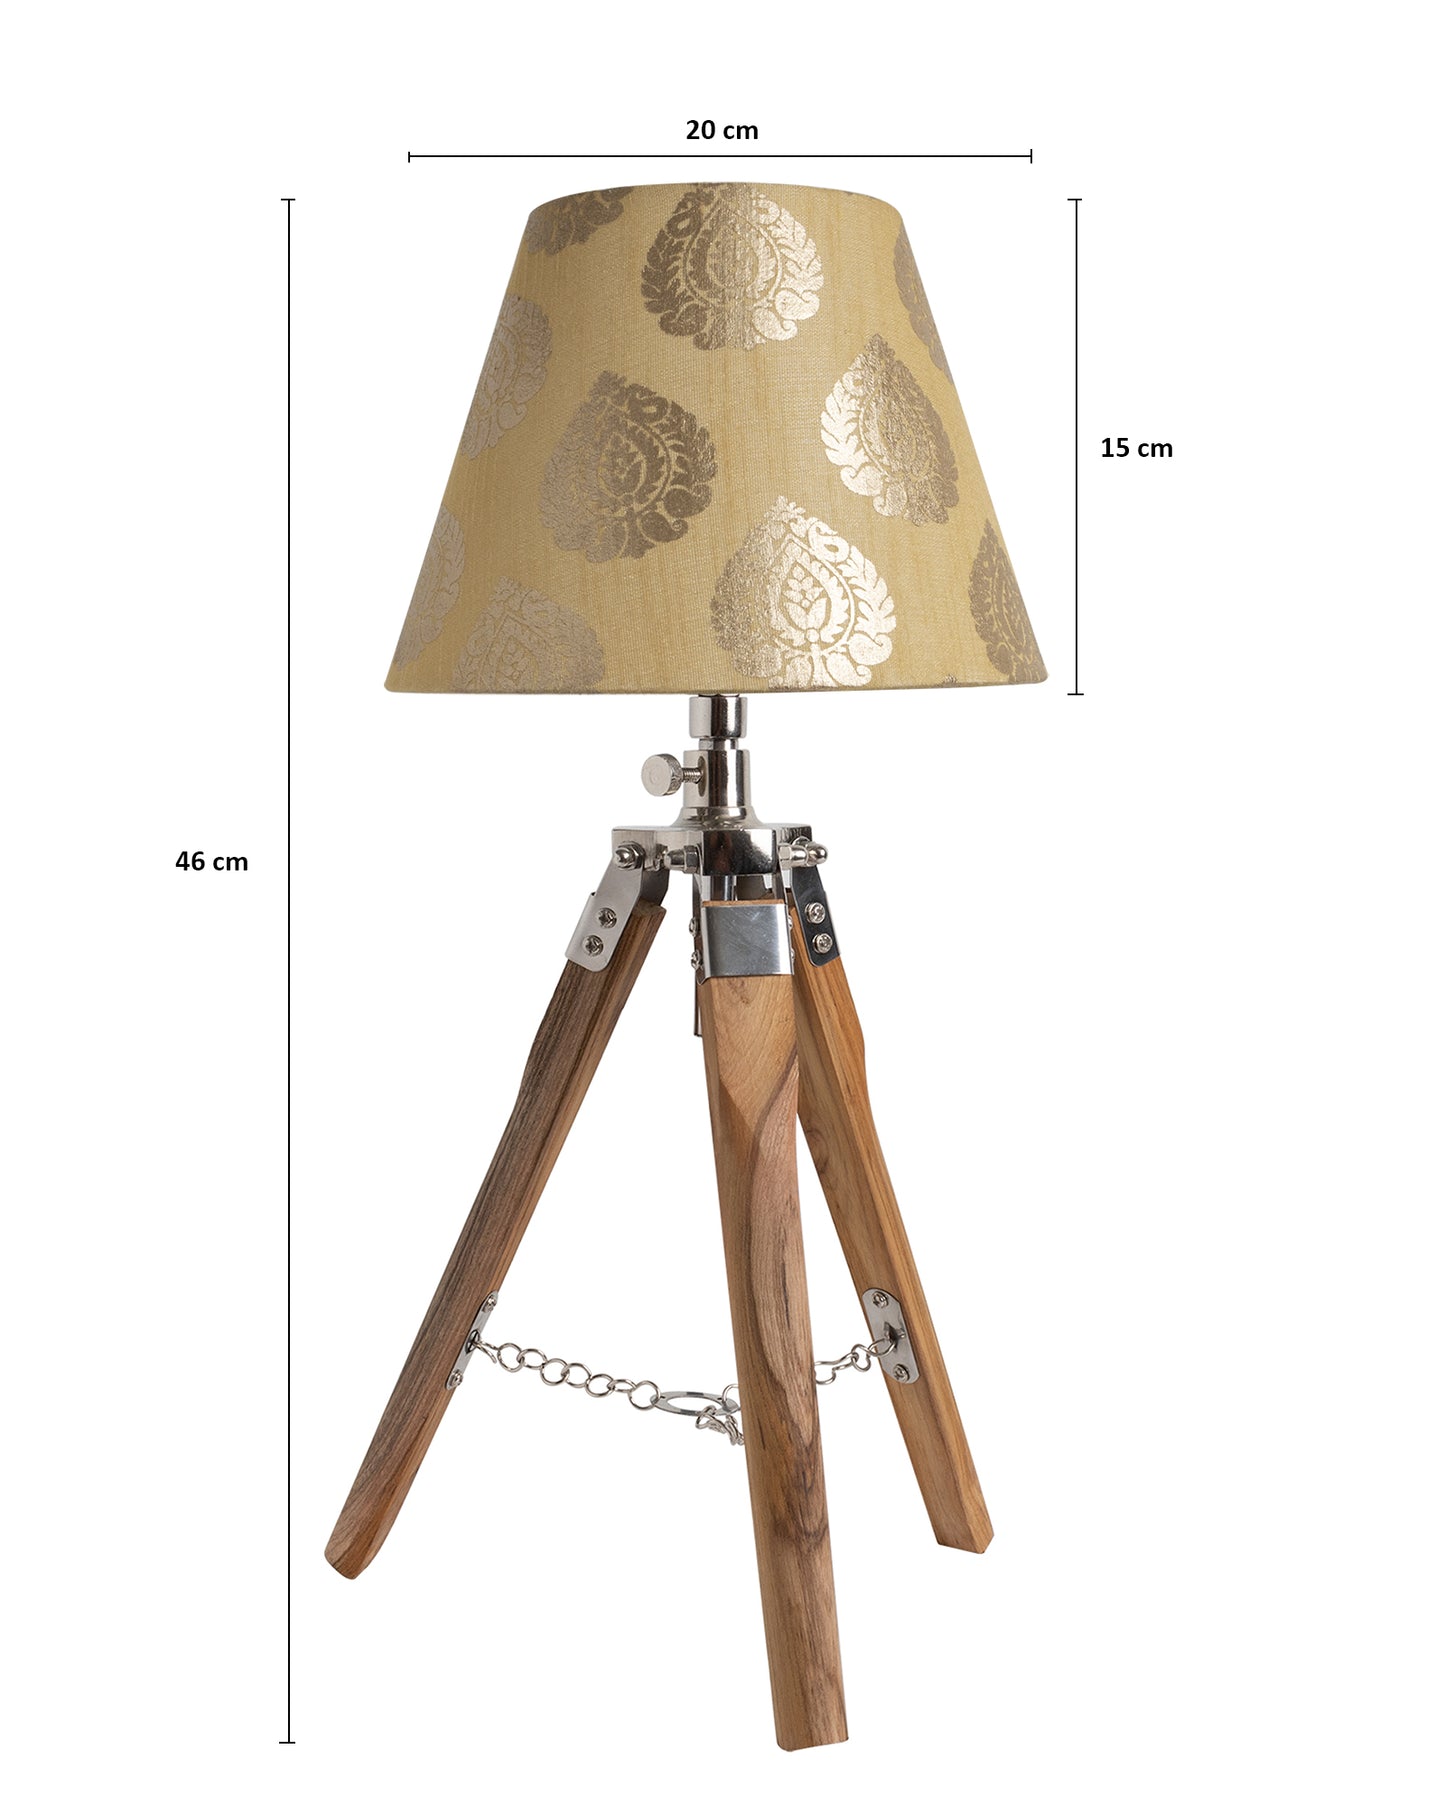 Modern Table Lamp, Wooden Base Modern Fabric Lampshade for Home Office Cafe Restaurant, Tripod